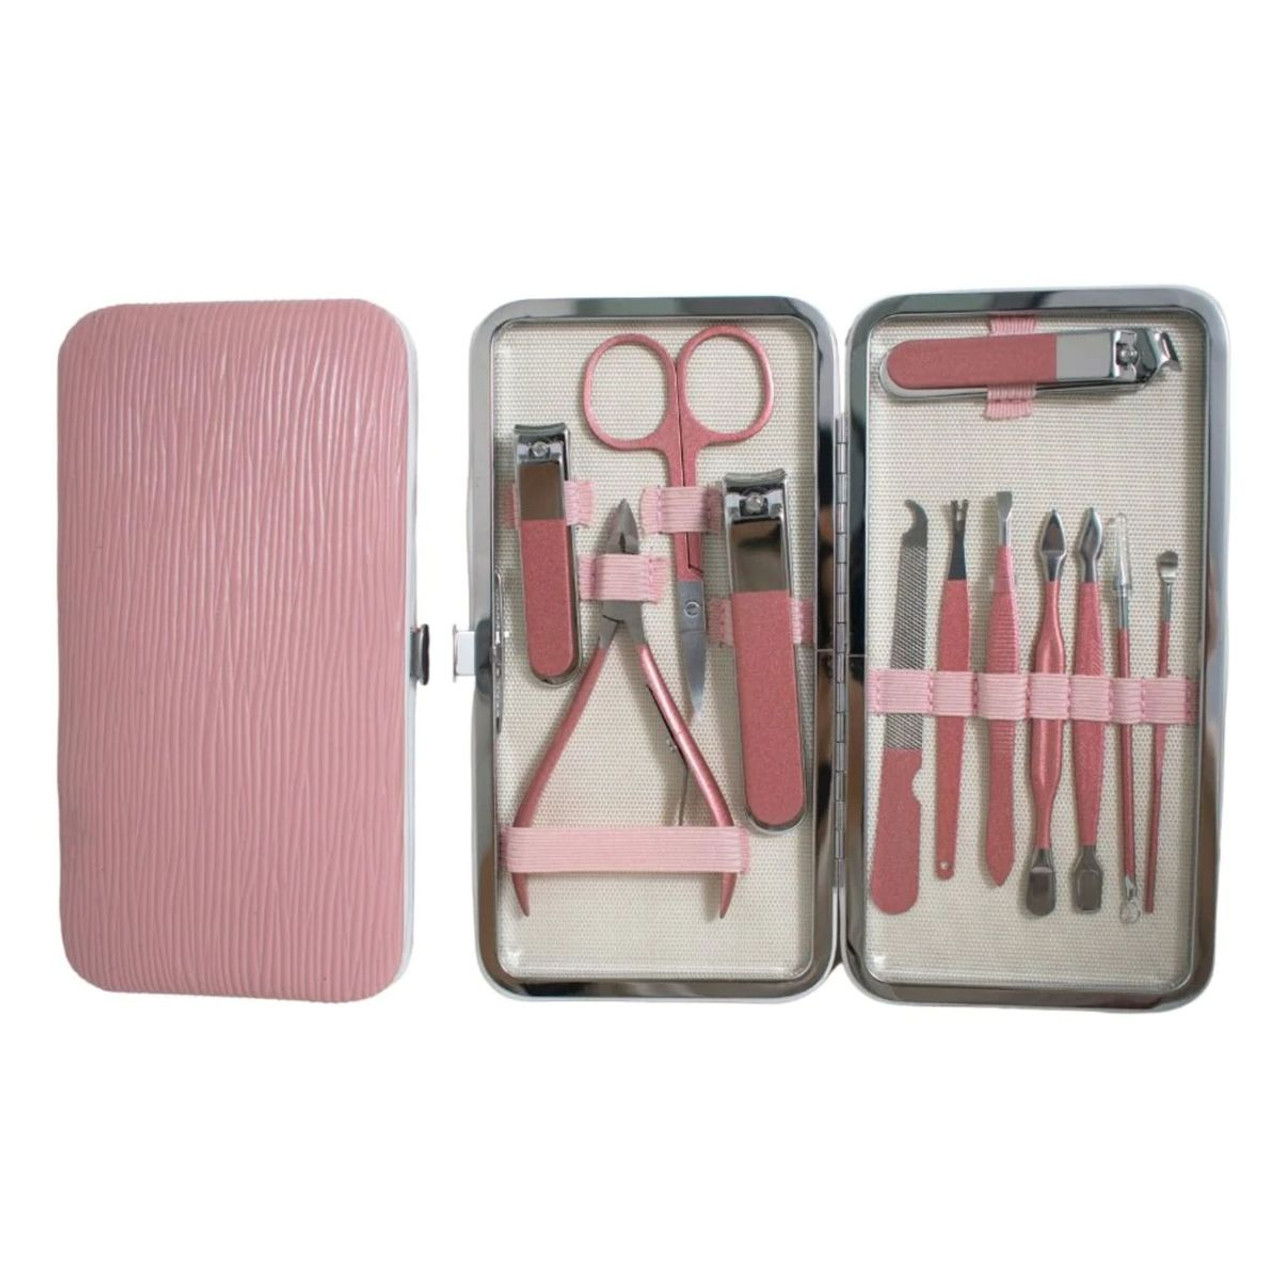 Multitasky™ Pretty in Pink Manicure Set, 12 pc. product image